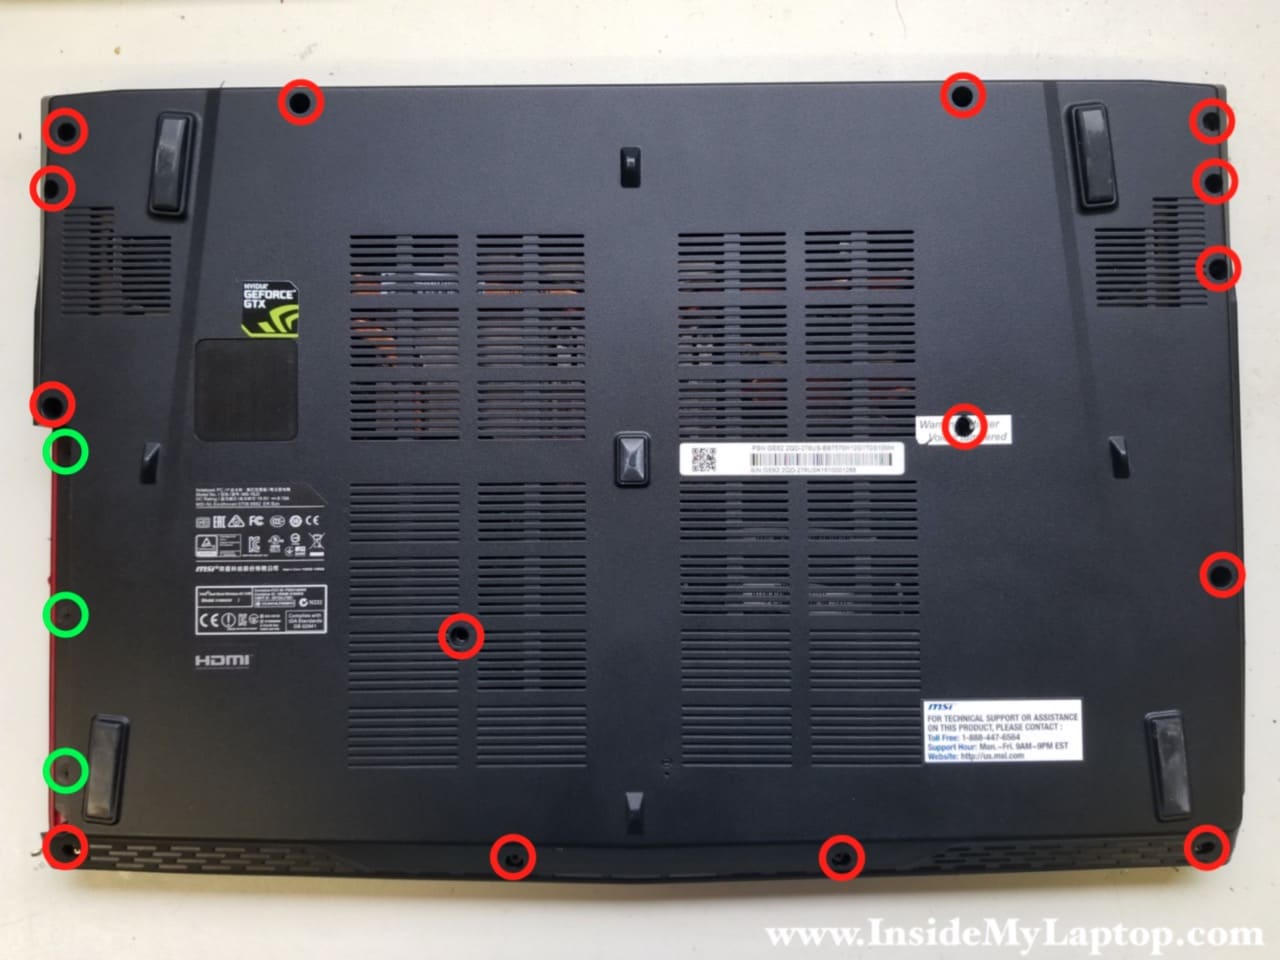 Full disassembly guide for MSI GE62 GP62 PE60 – Inside my laptop